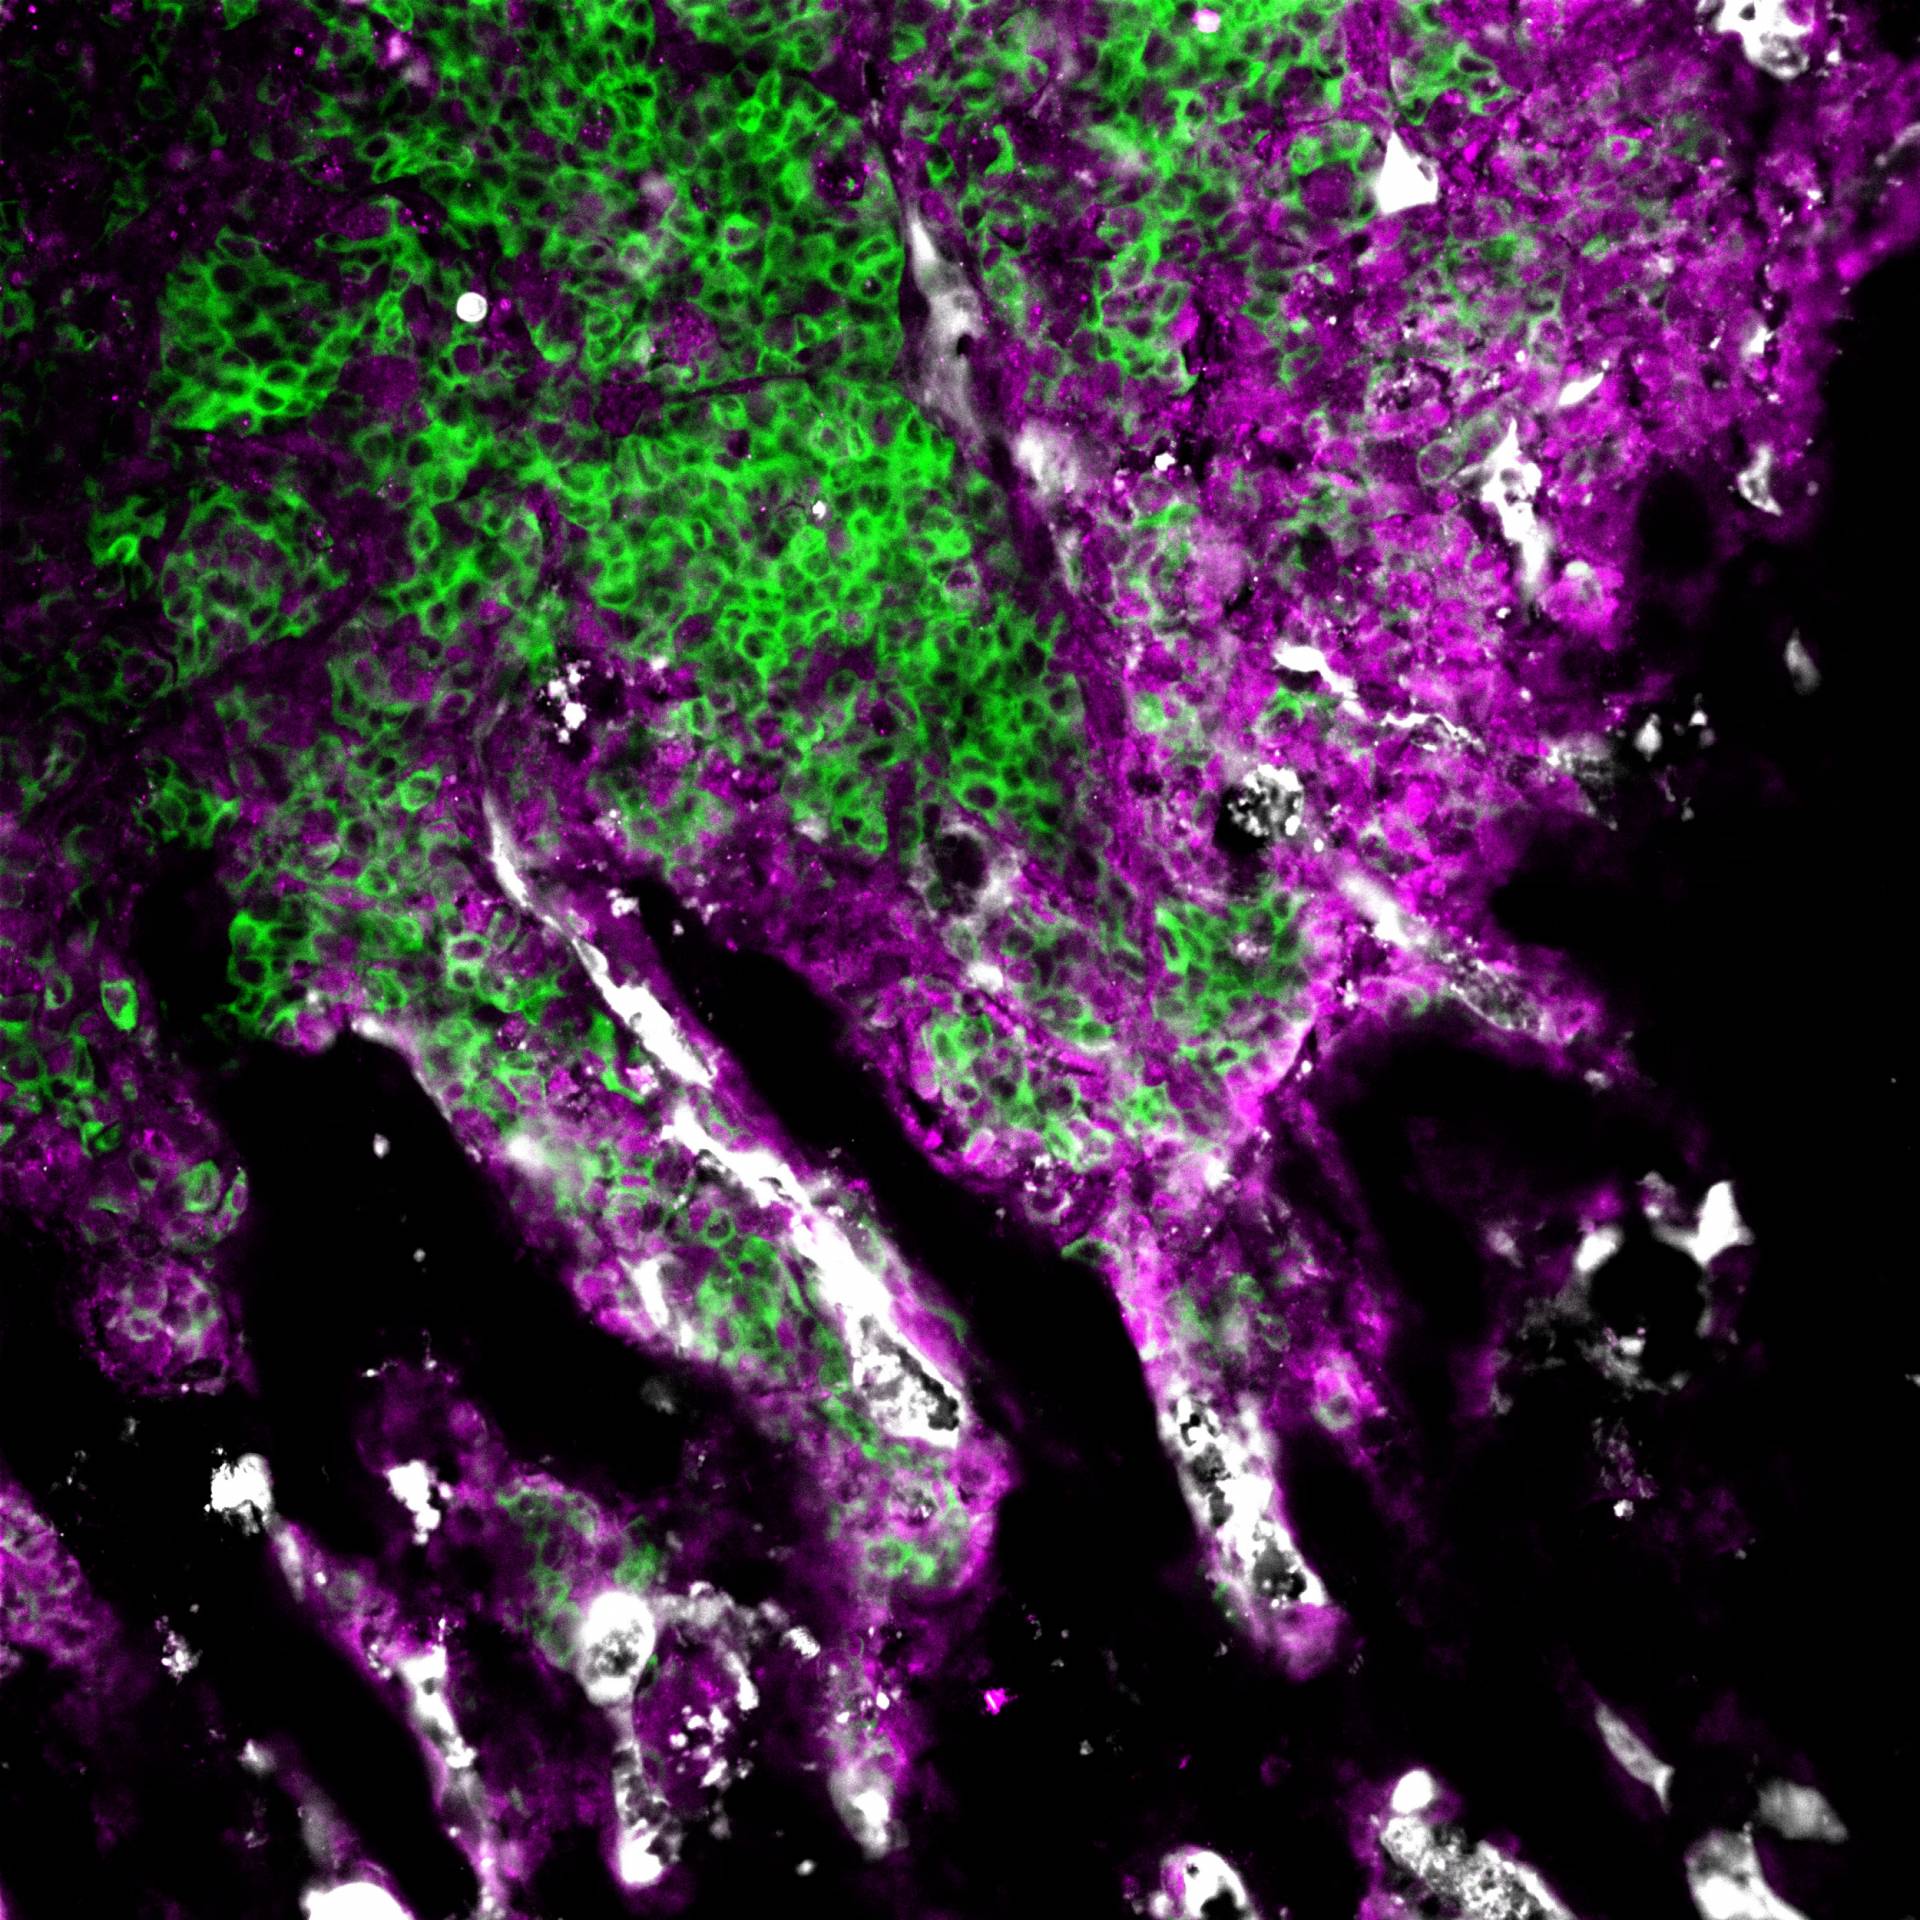 Microscope image showing brest cancer cells invading bone